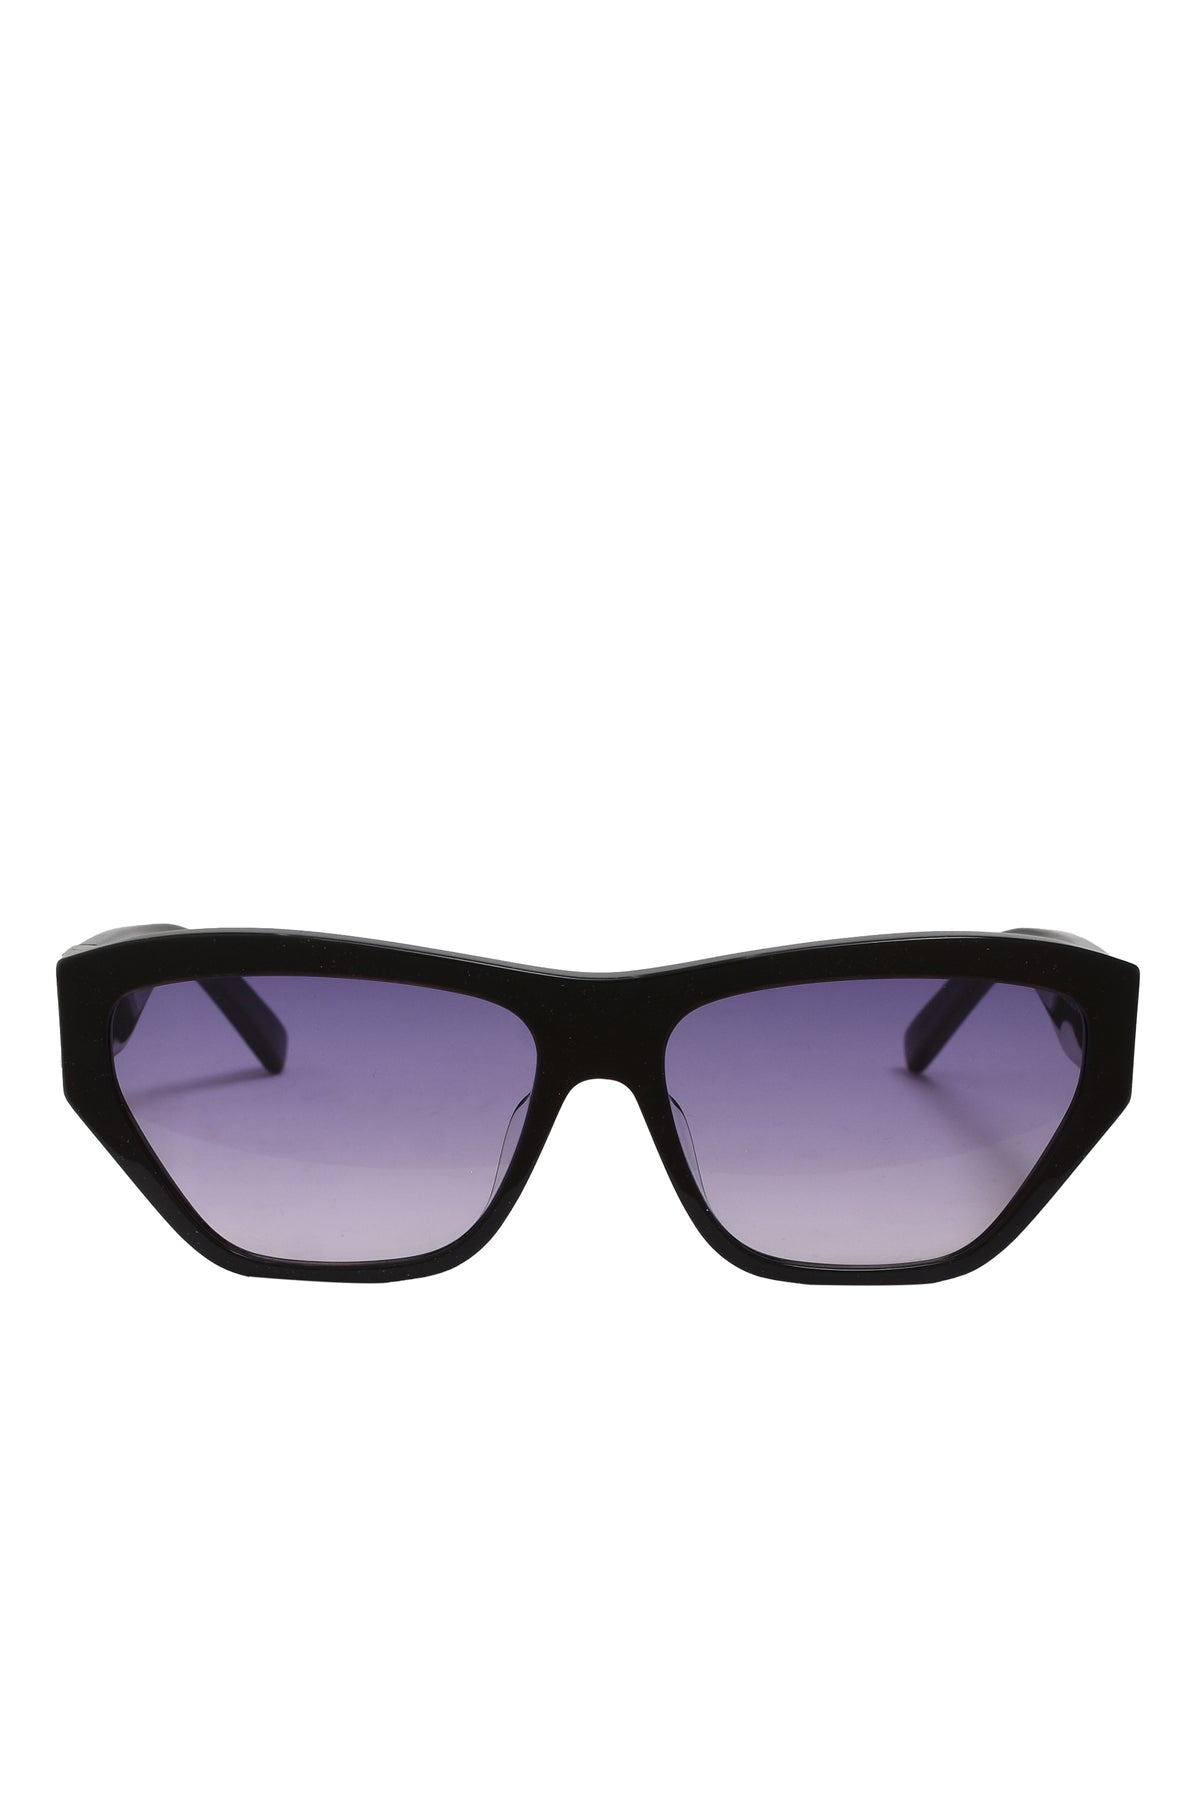 GIVENCHY SUNGLASSES/BLK/OTHER/GRADIENT OR MIRROR VIOLET